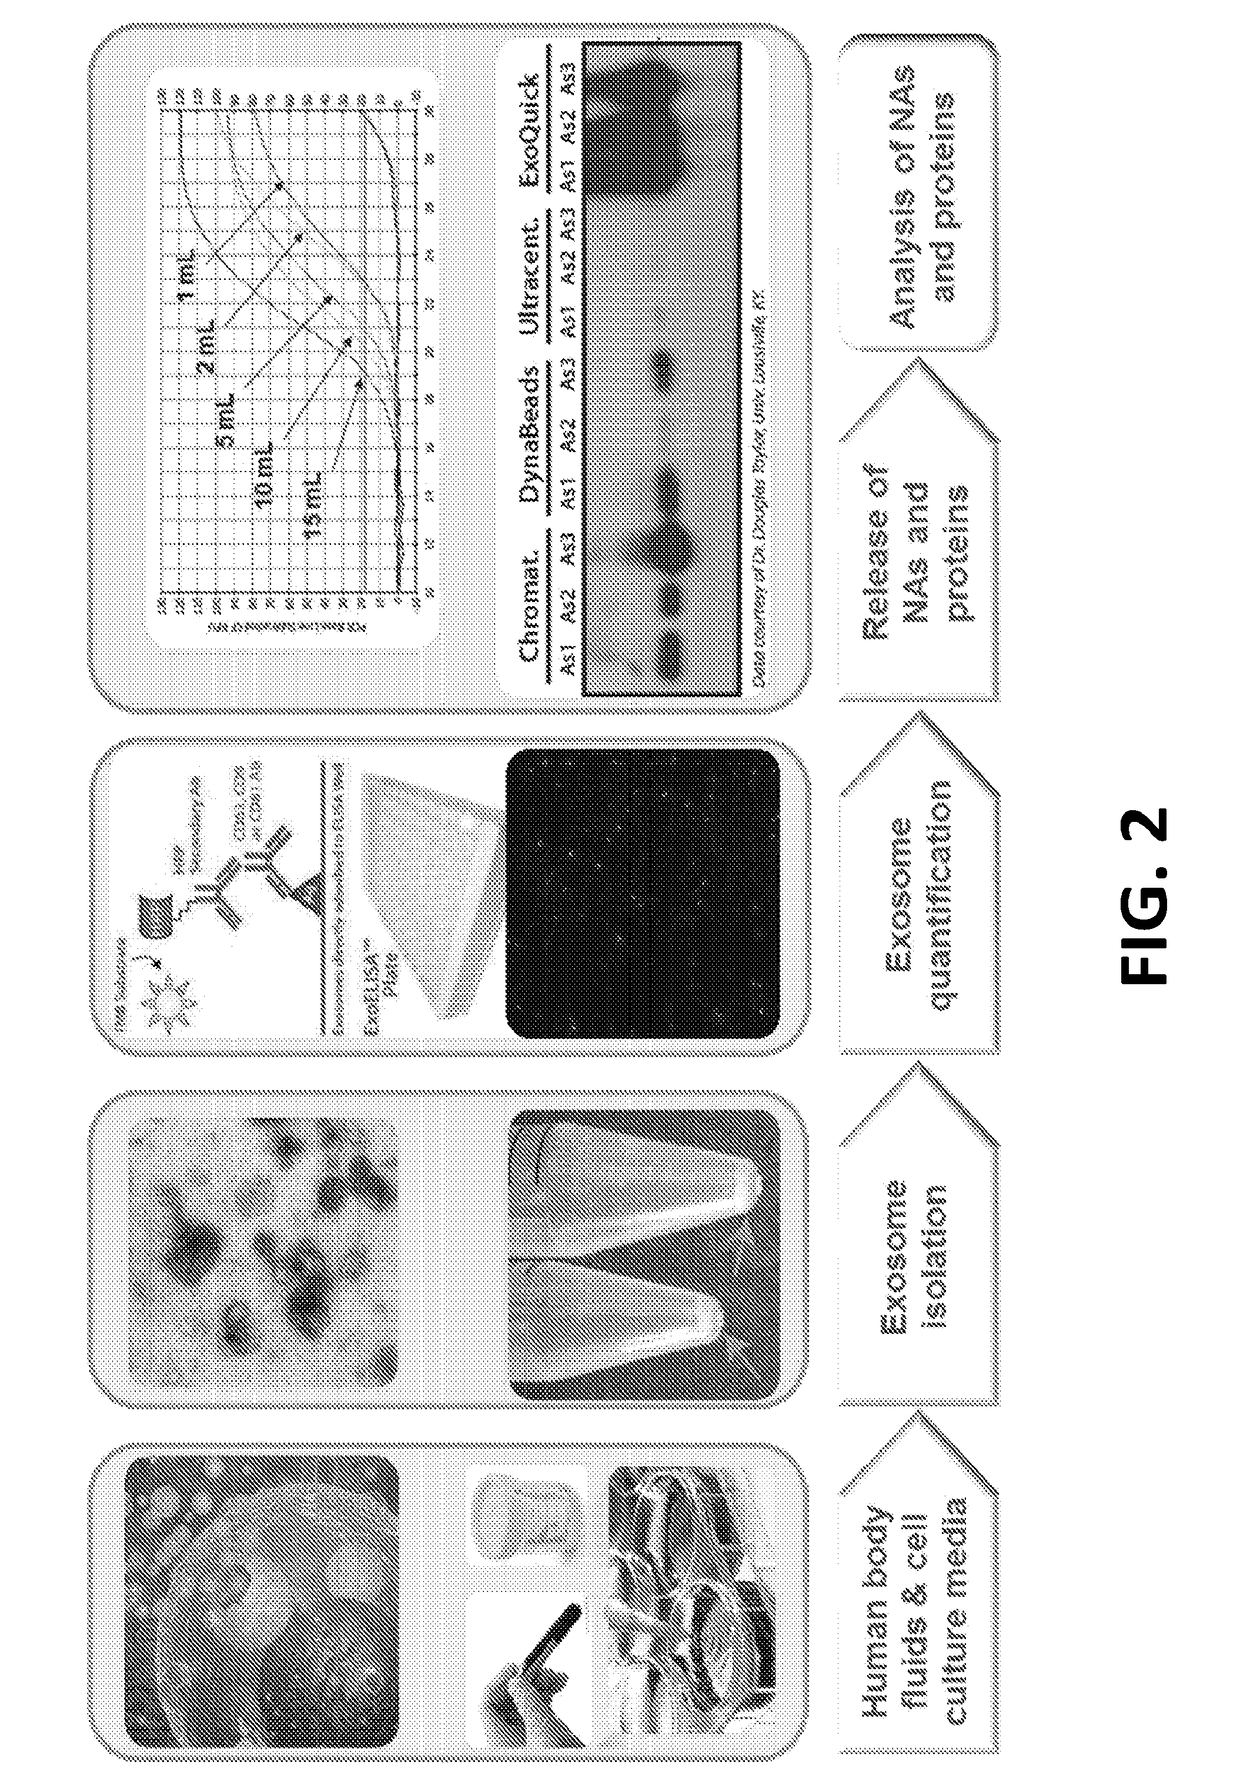 Exosome-Total-Isolation-Chip (ExoTIC) Device for Isolation of Exosome-Based Biomarkers